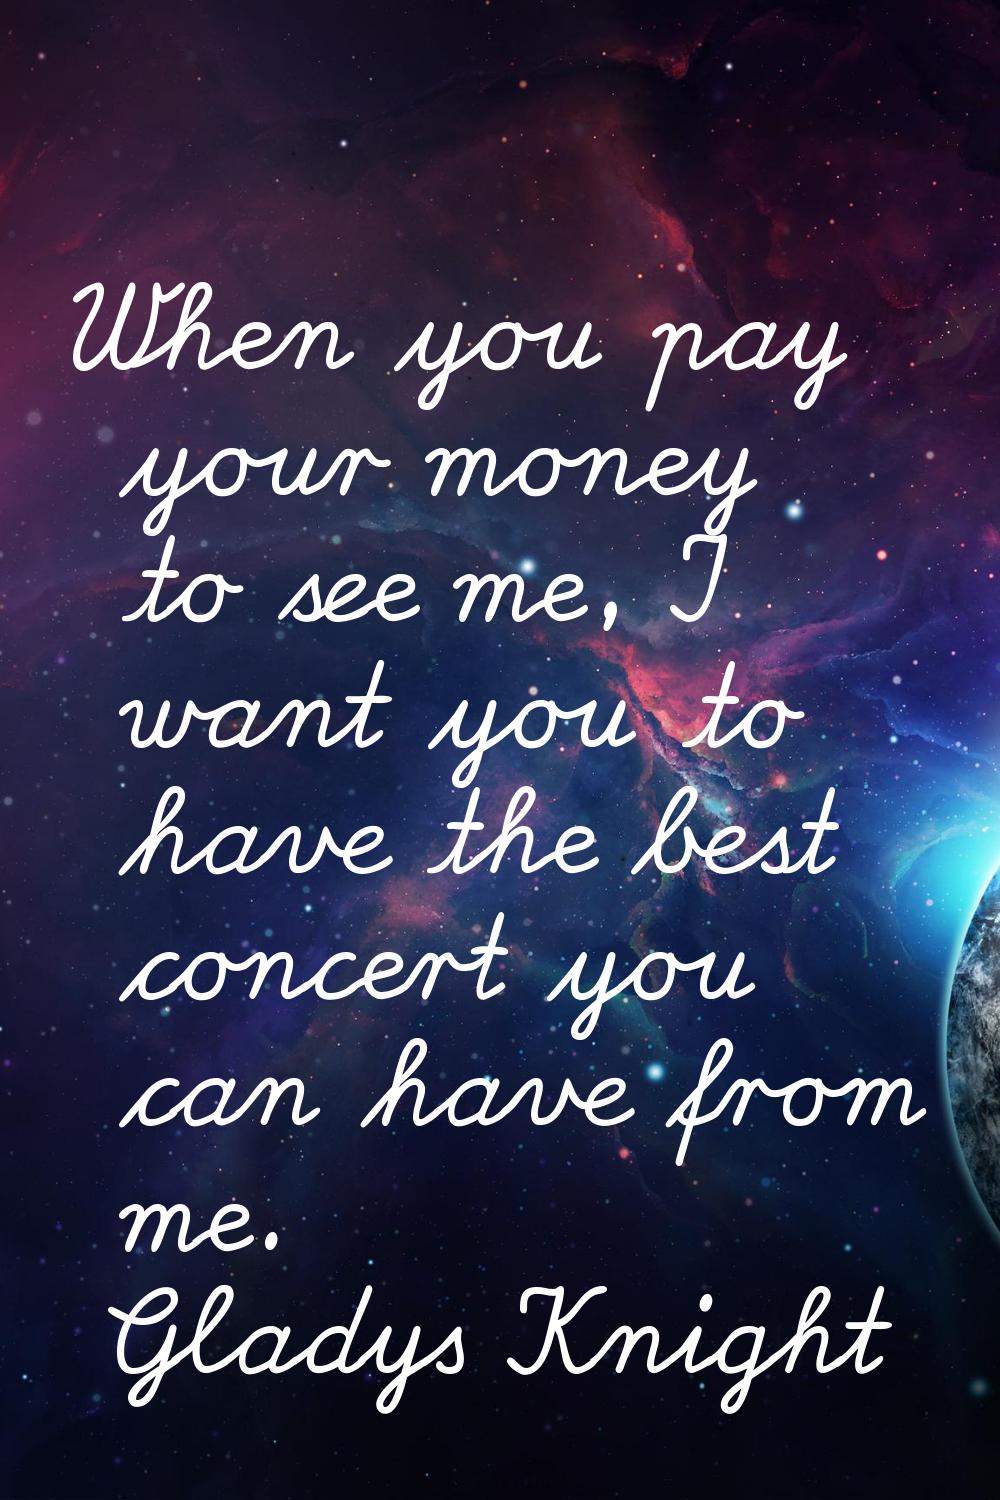 When you pay your money to see me, I want you to have the best concert you can have from me.